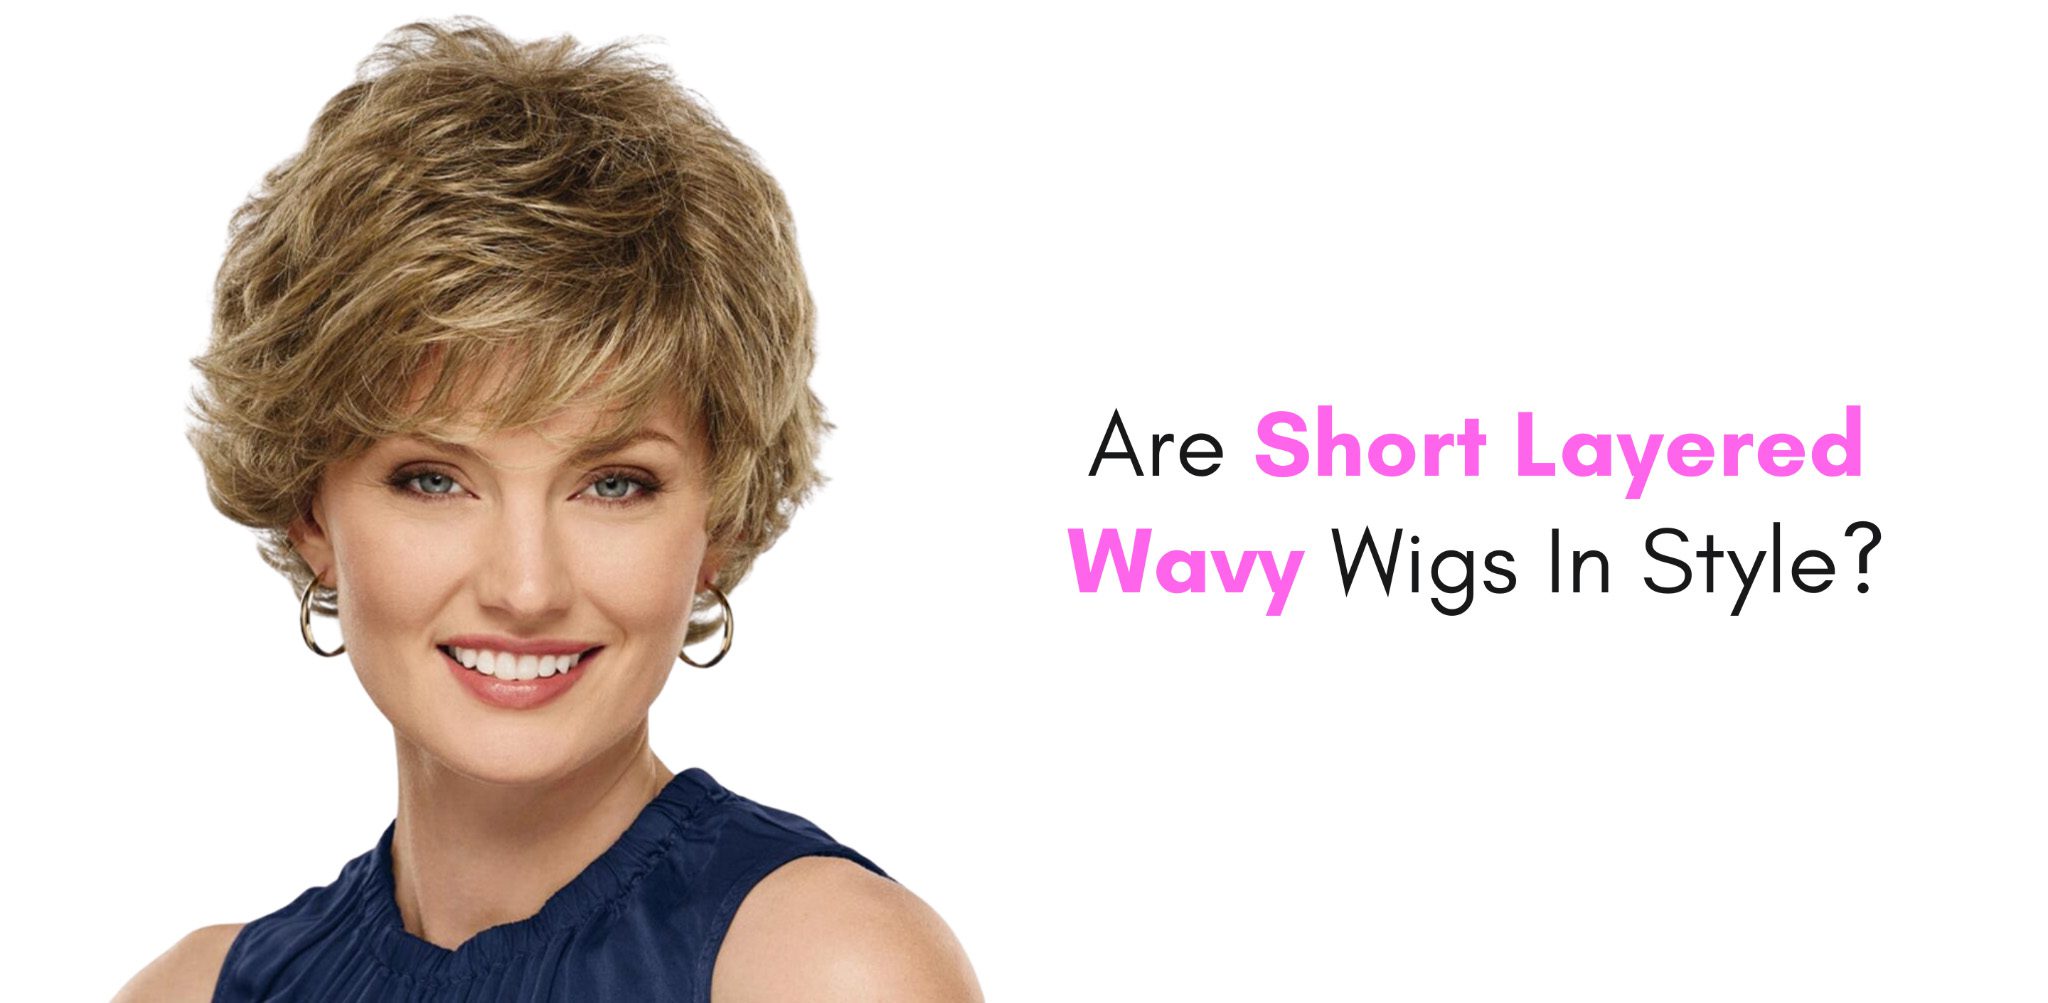 are short layered wavy wigs in style